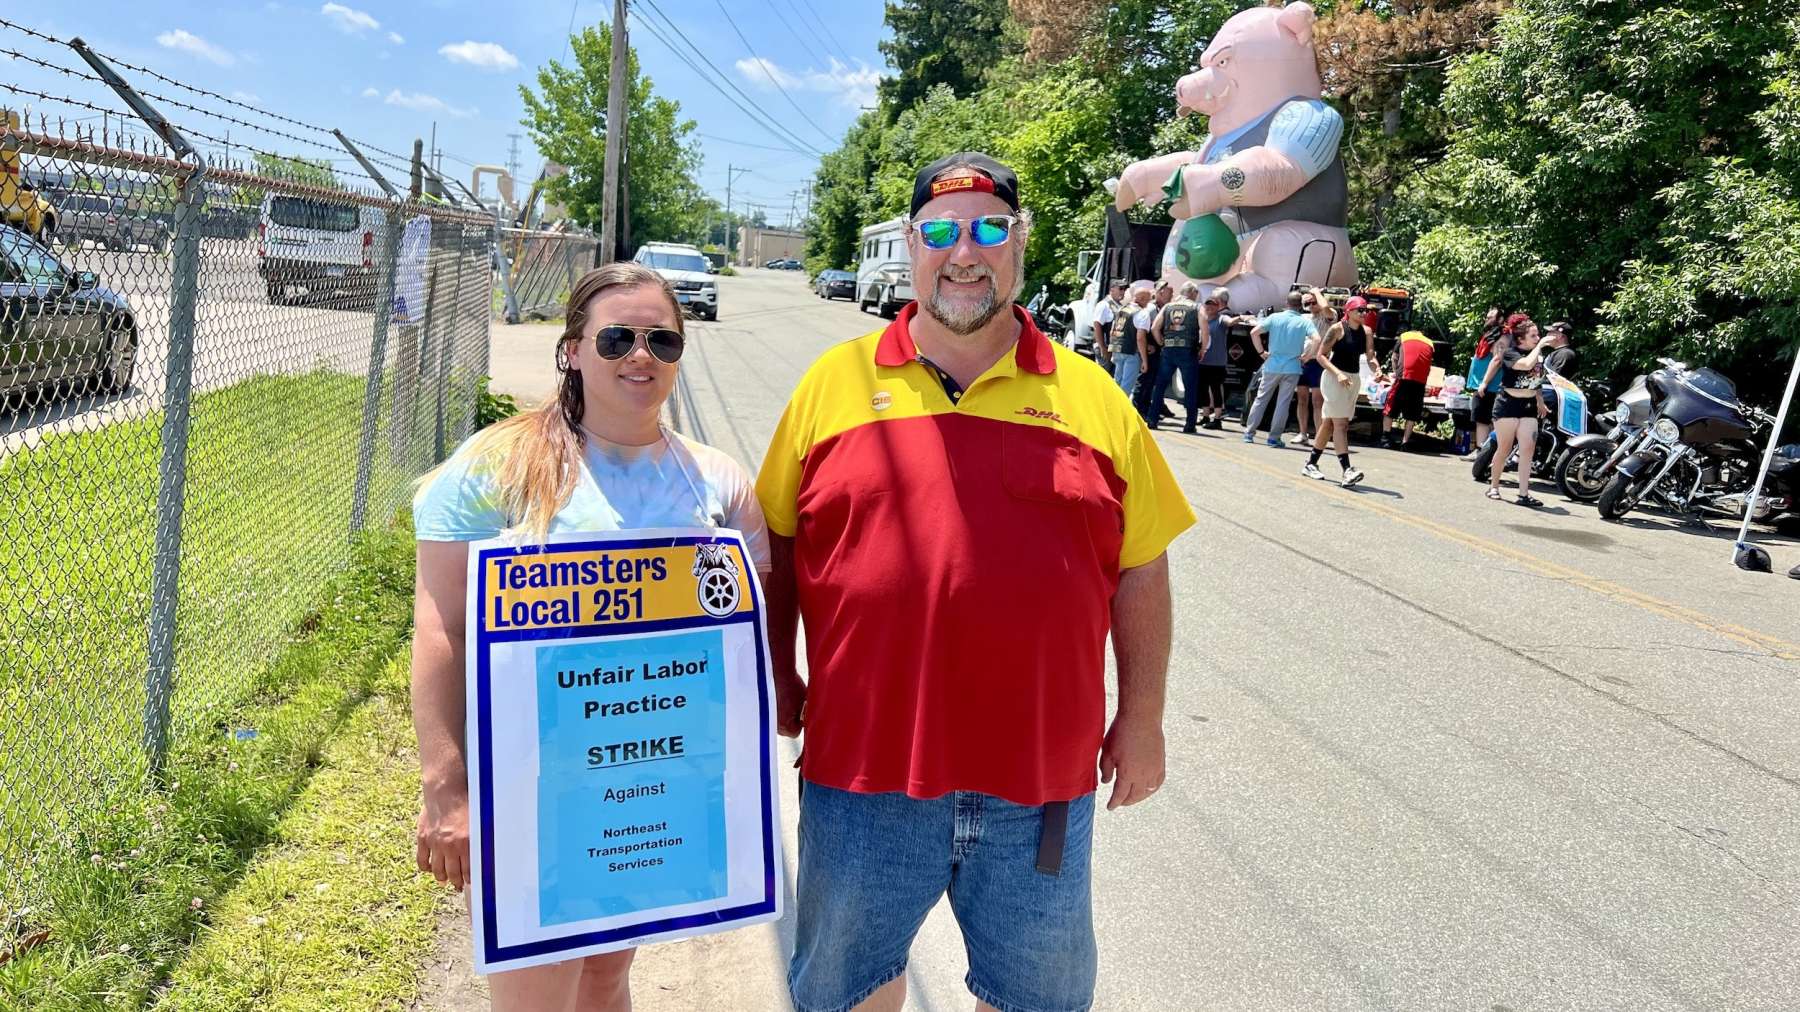 Rhode Island News: DHL workers in Pawtucket striking for livable wages and healthcare